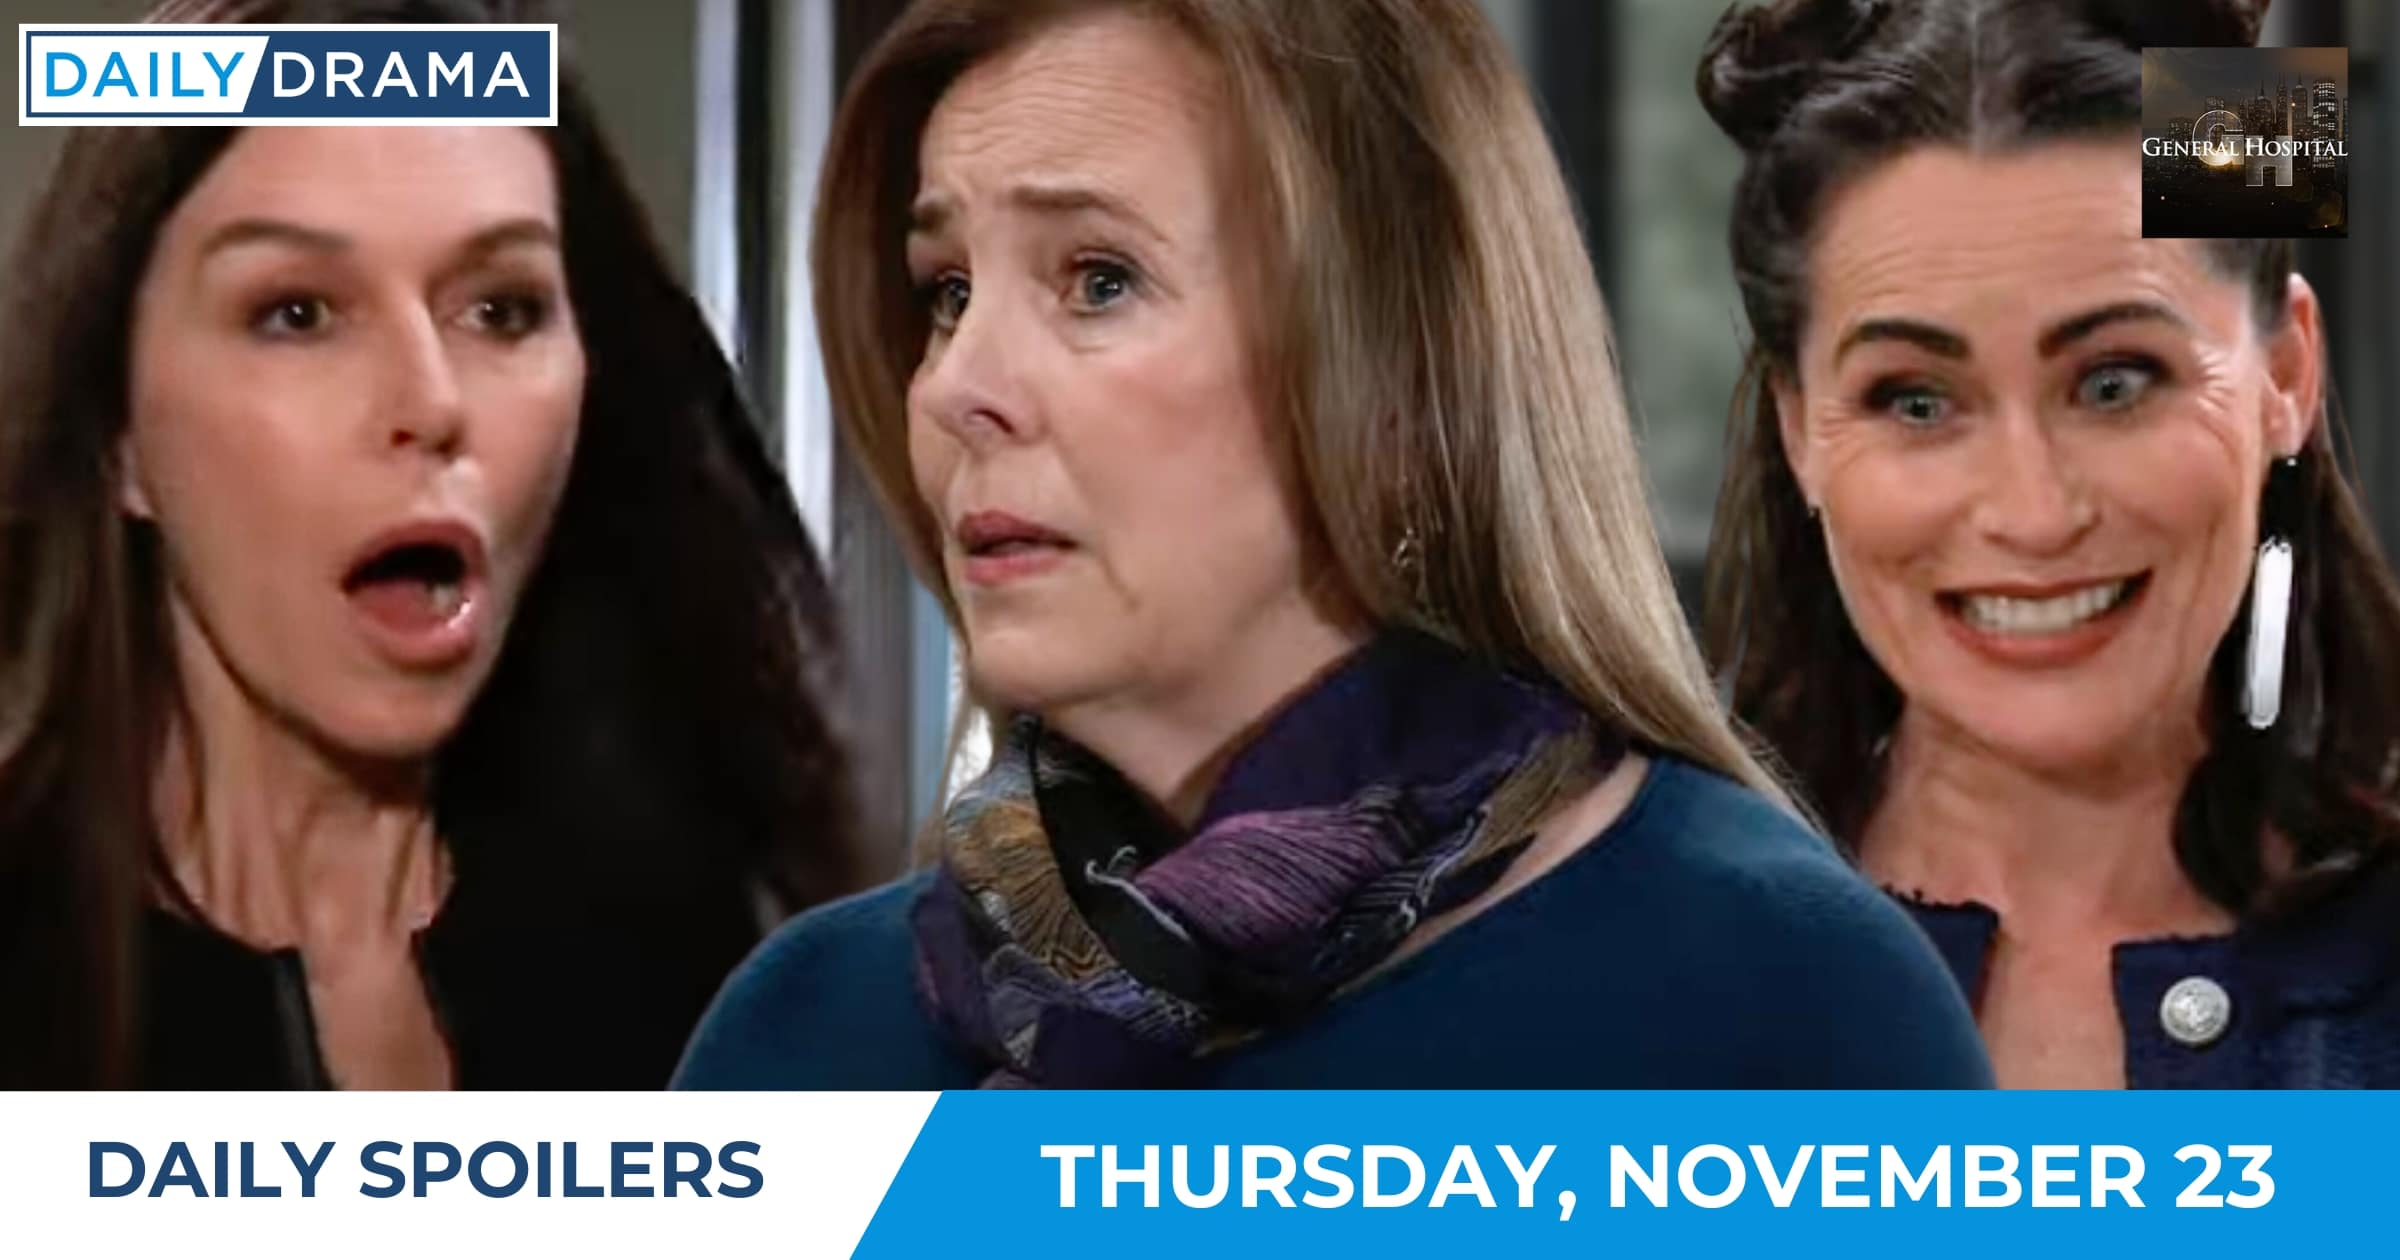 General Hospital Daily Spoilers - Nov 23 - Anna Laura and Lois